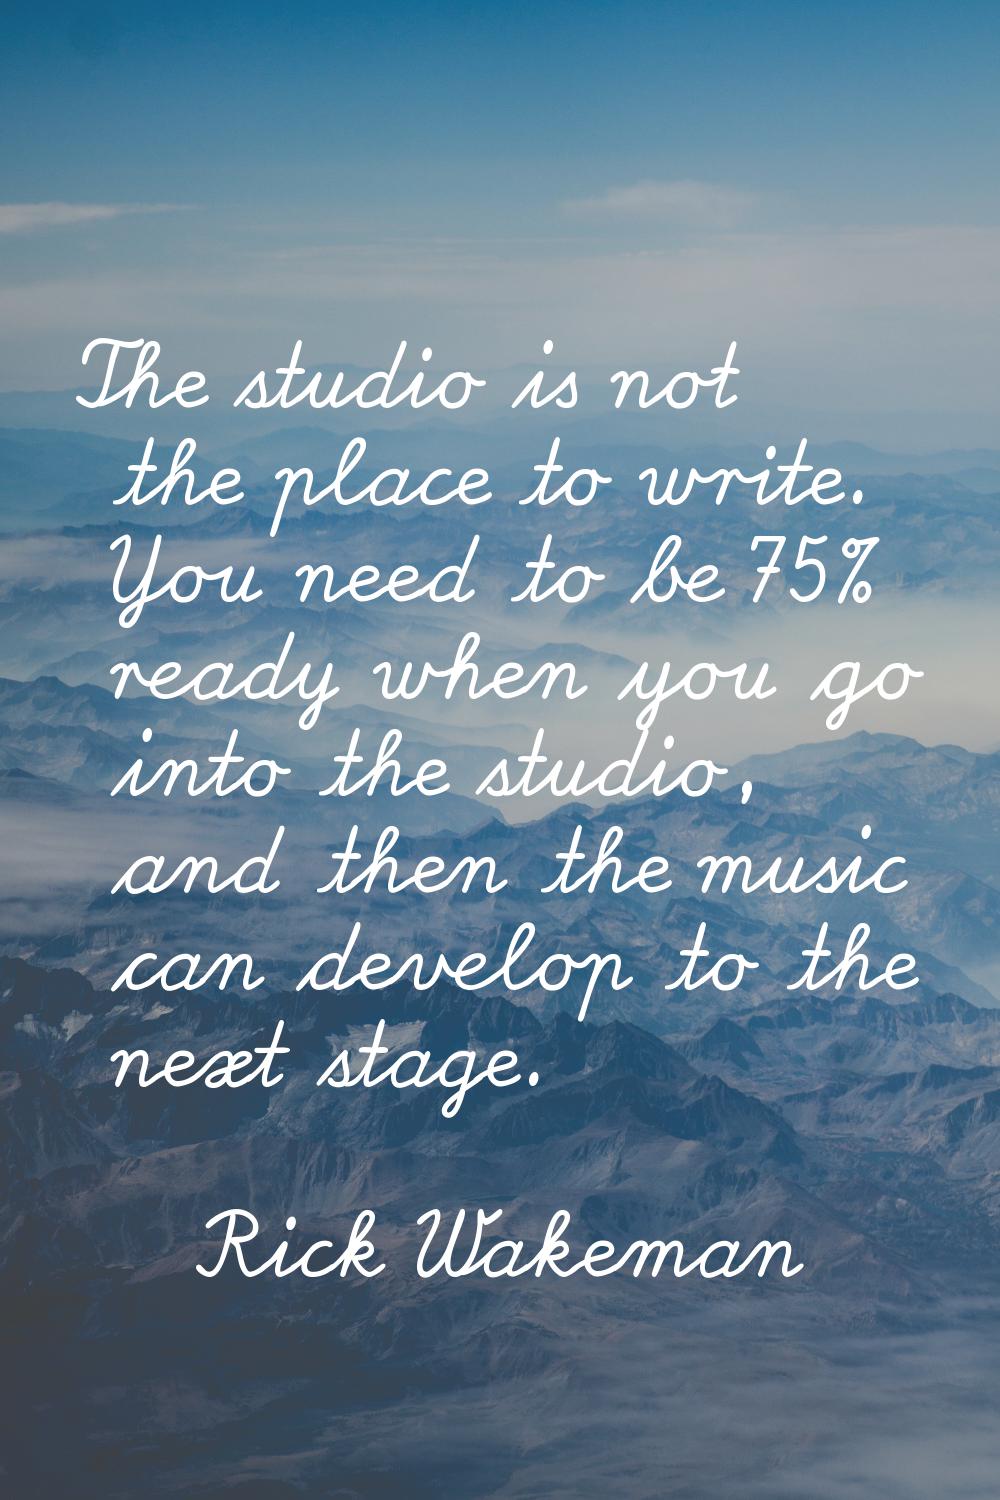 The studio is not the place to write. You need to be 75% ready when you go into the studio, and the